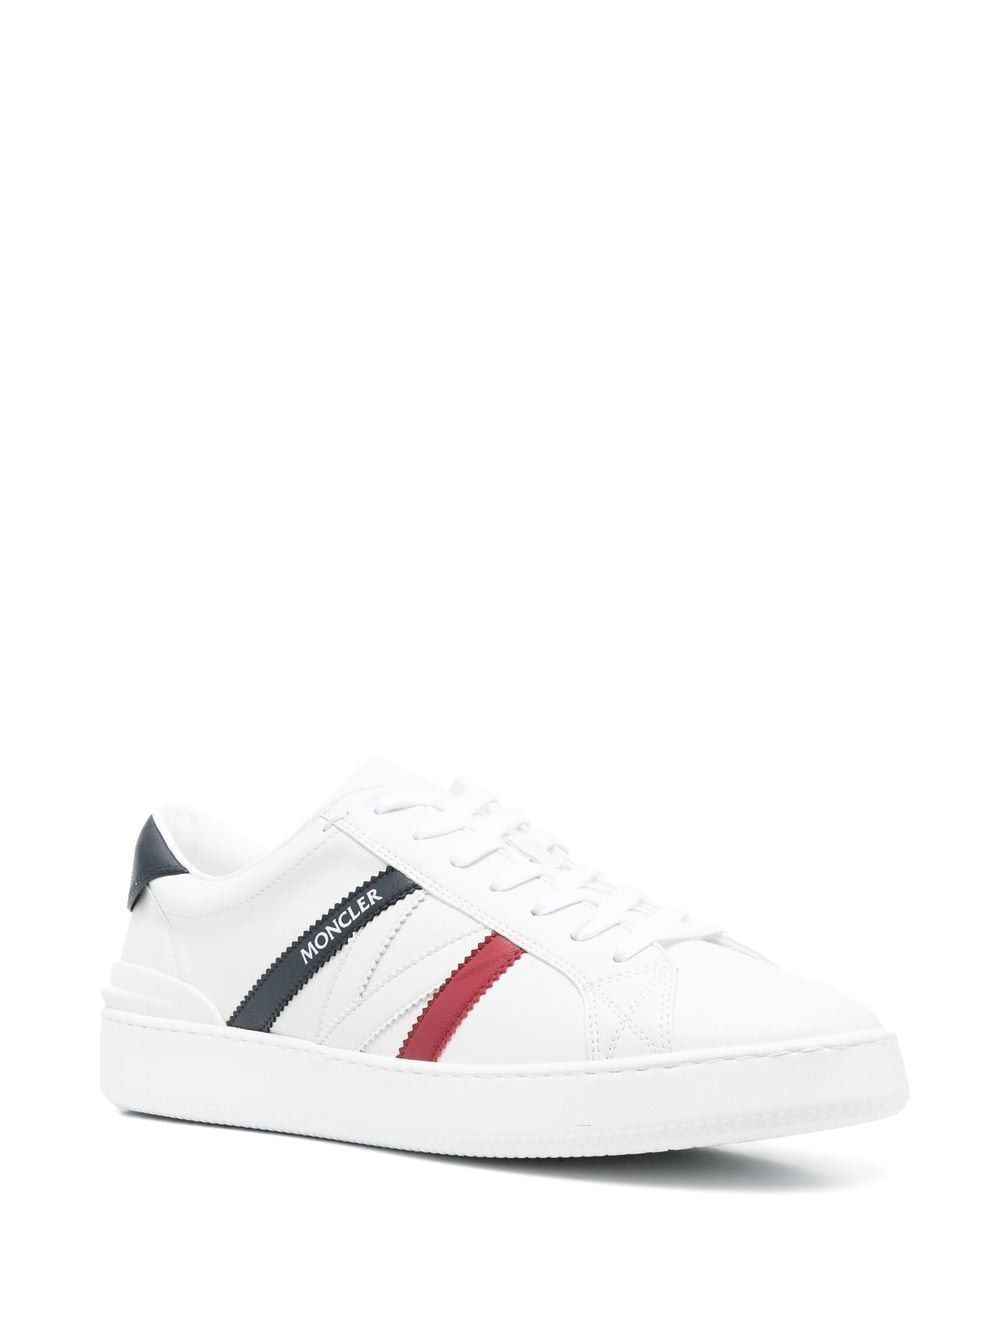 Shop Moncler White Leather Trainers For Men With Red And Blue Accents And Logo Detail